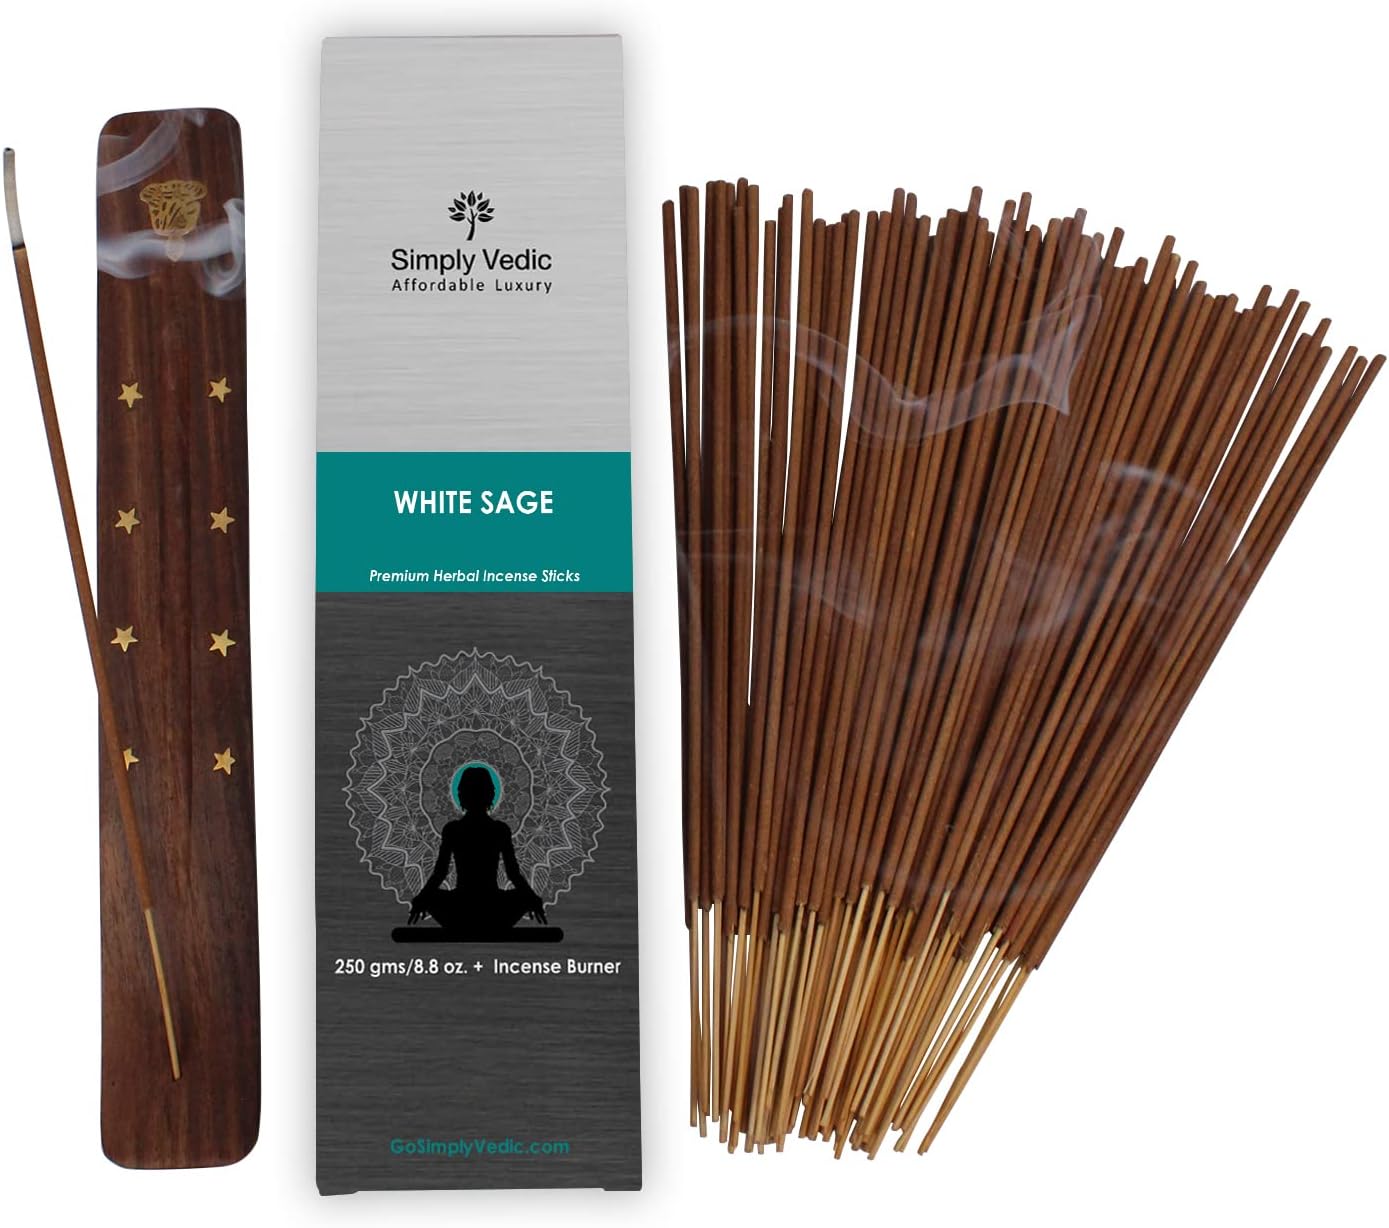 Simply Vedic White Sage Incense Sticks 250-Grams (Approx 135 Premium Sticks + Holder) | Lasts 45-Minutes, Ideal for Meditation, Yoga, Spiritual Healing, Aromatherapy Energy Cleansing.